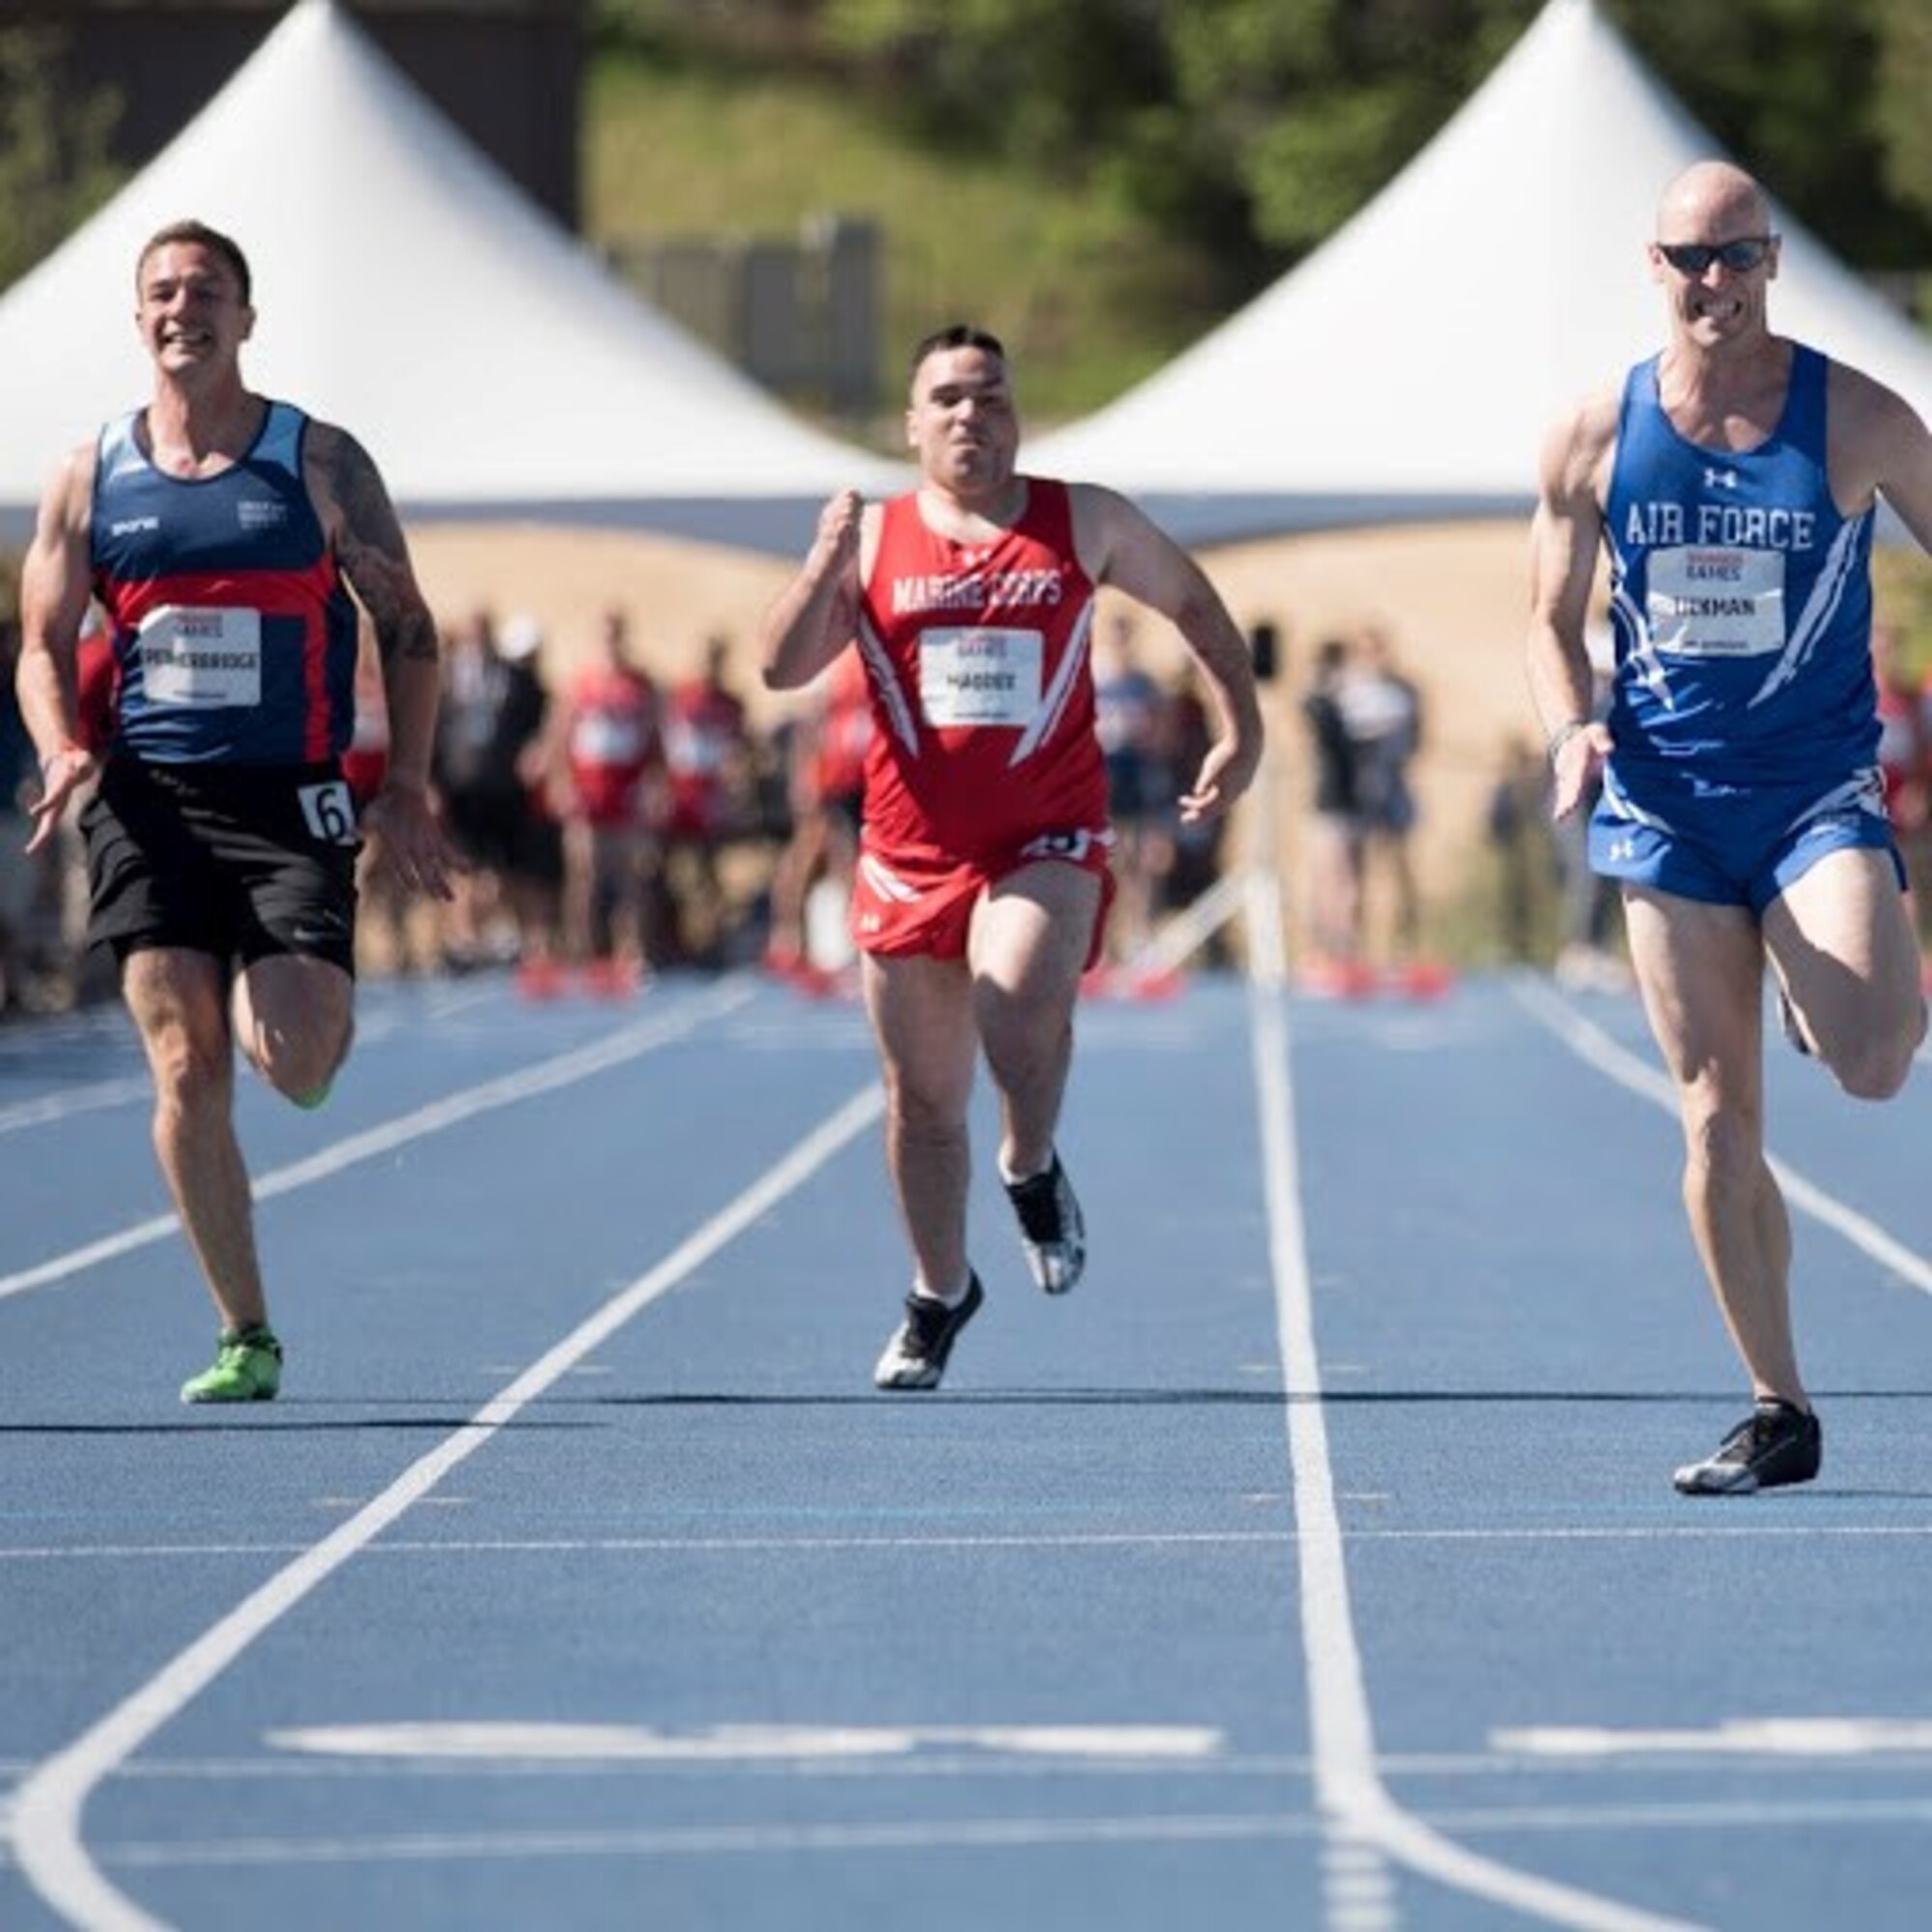 AFOSI Special Agent Bill Lickman, right, of Detachment 223, Tyndall Air Force Base, Fla., staves off competition from sister services during a Department of Defense Warrior Games track event at the United States Air Force Academy, Colo., in June 2018. (Photo by AFW2)